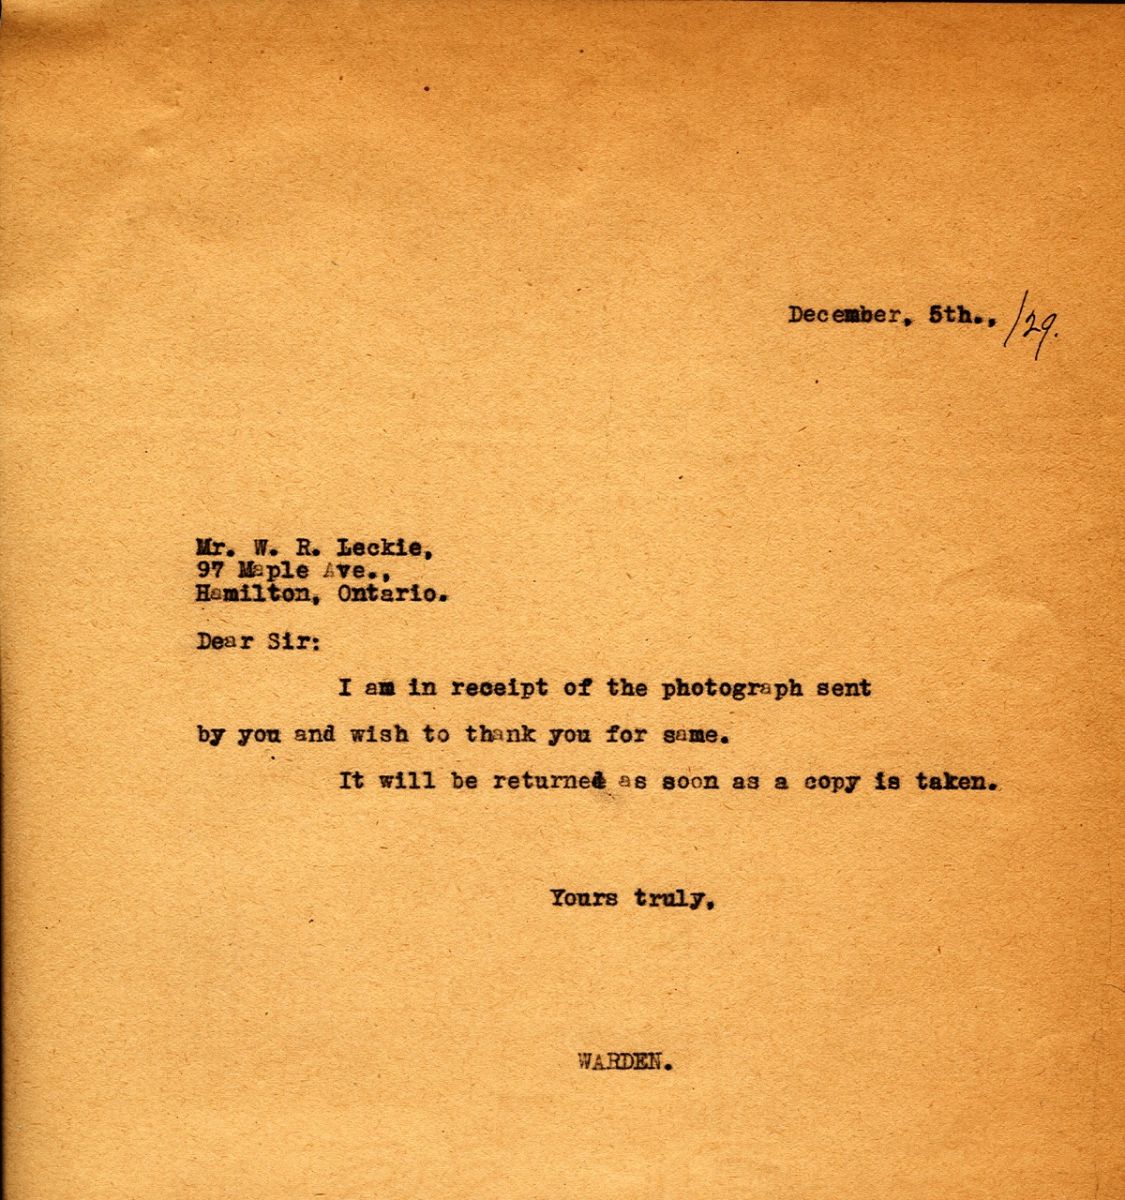 Letter from the Warden to Mr. W.R. Leckie, 5th December 1929